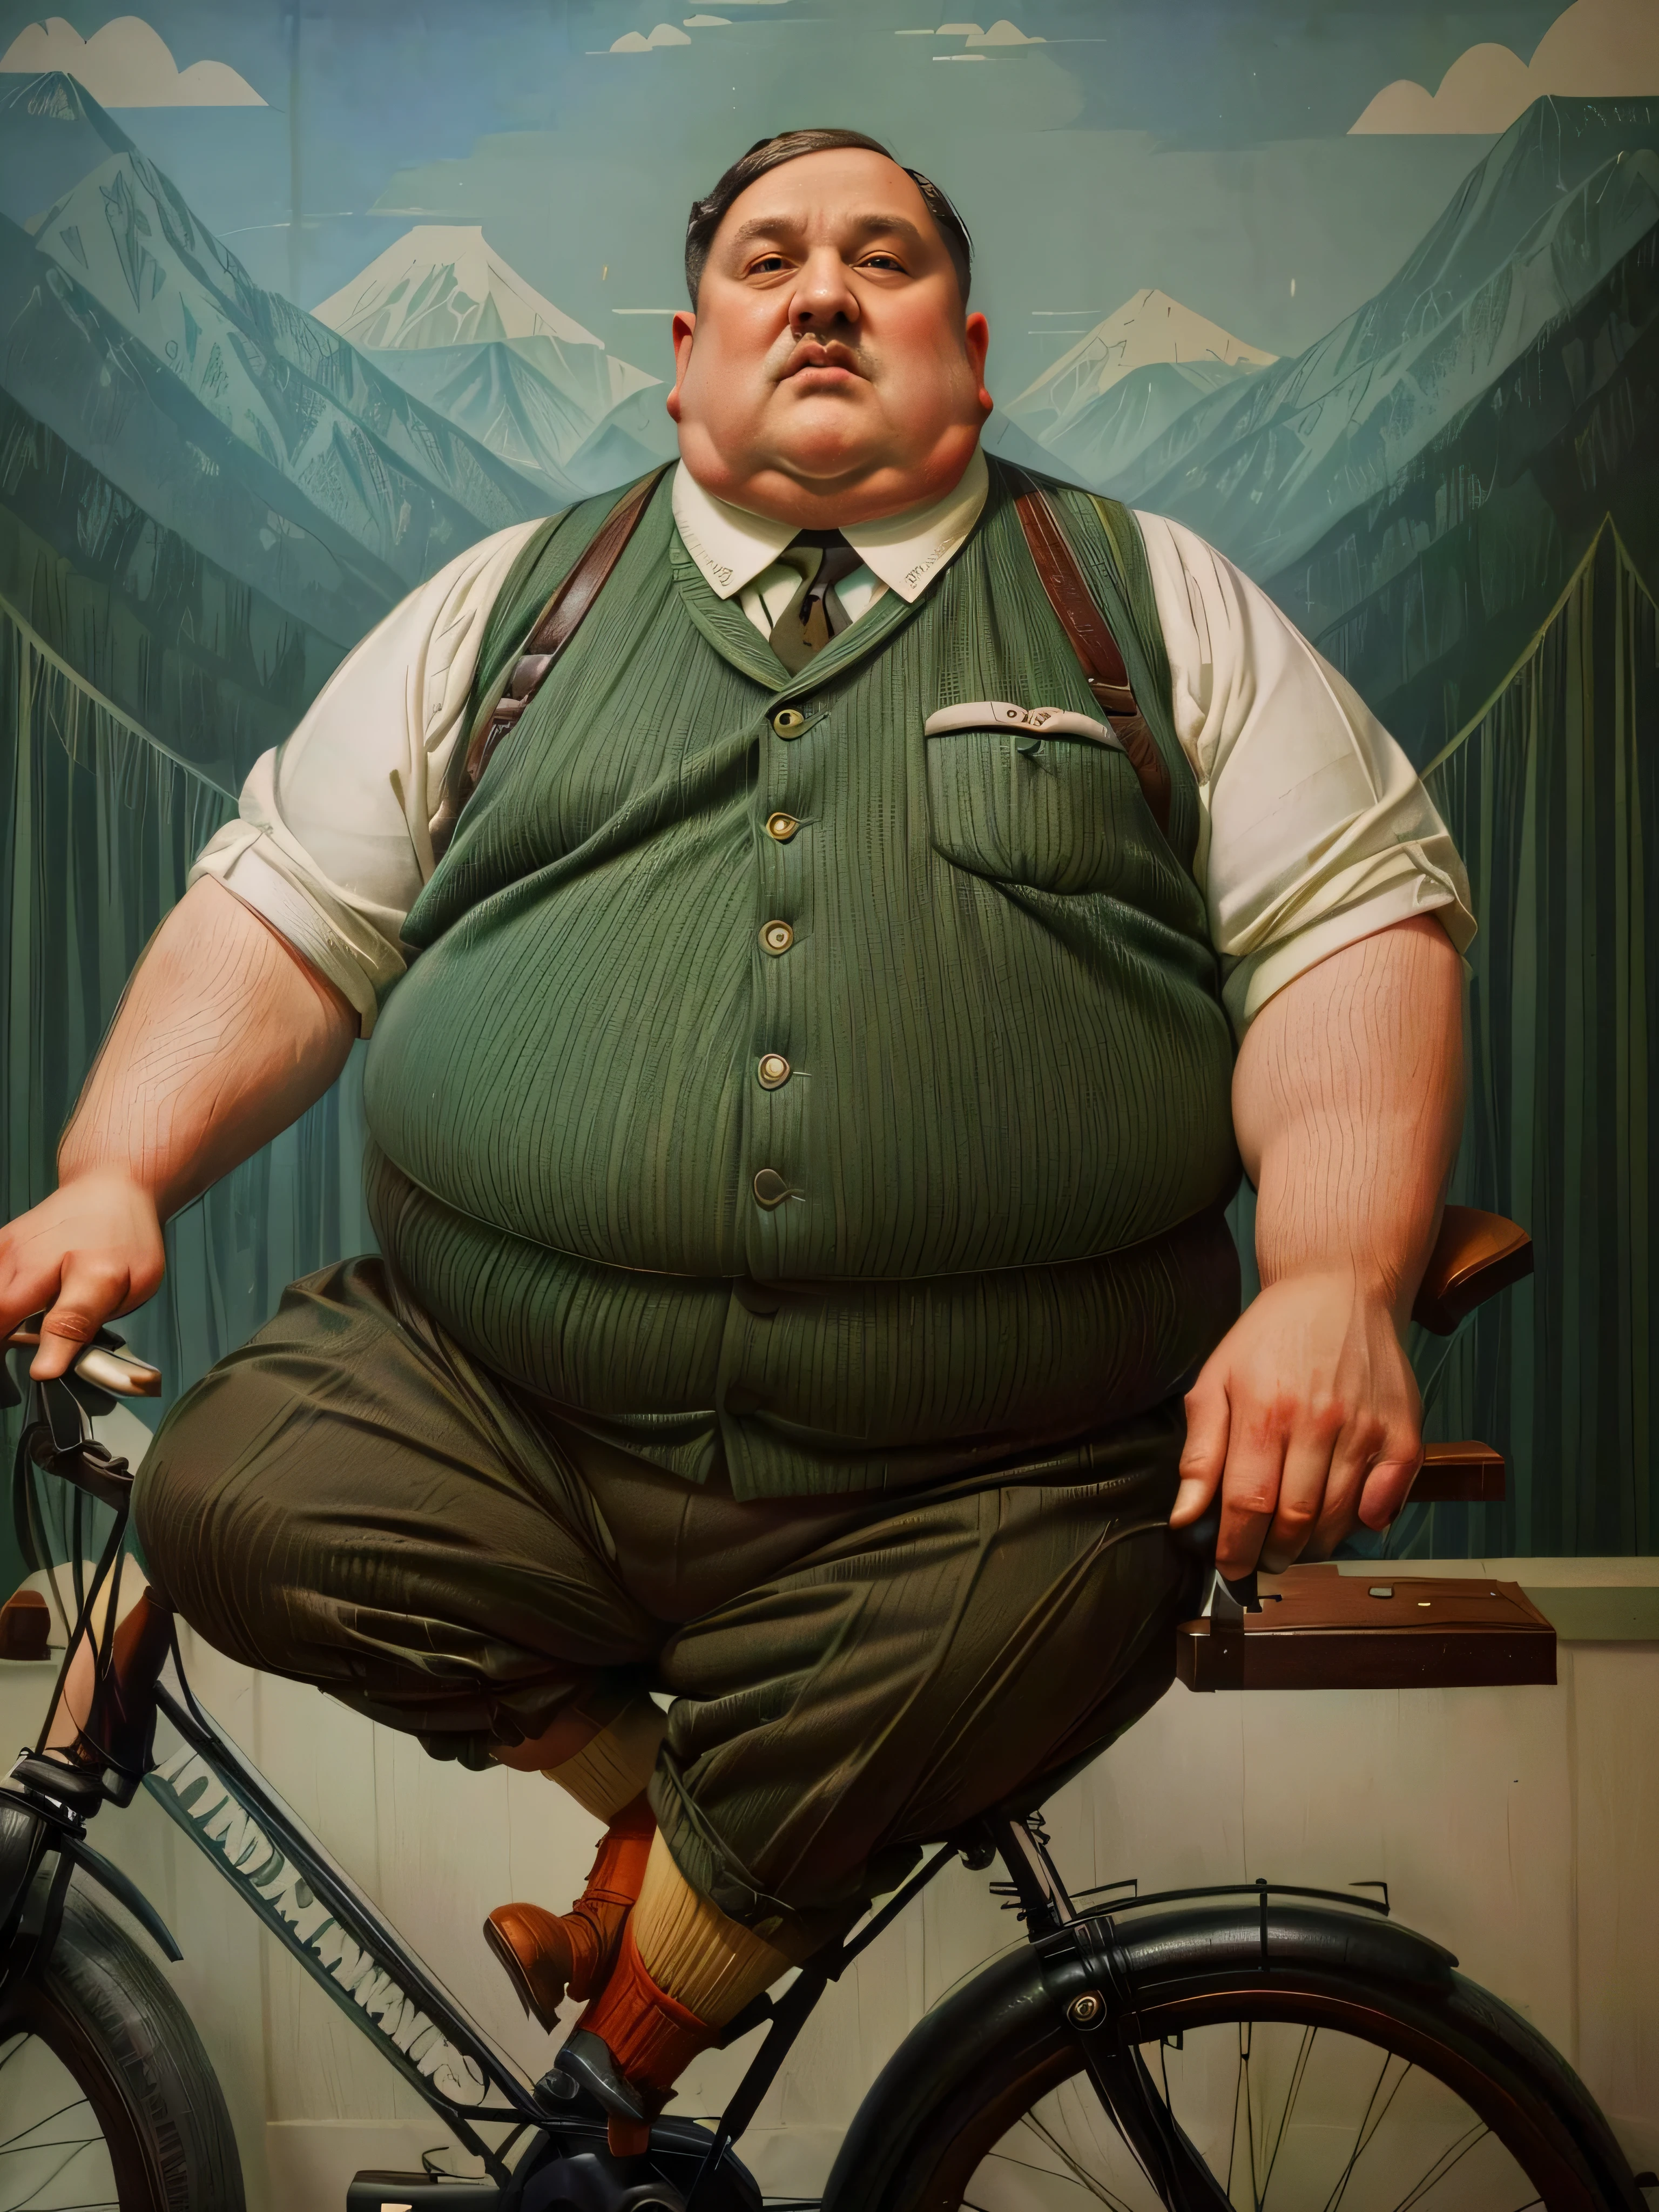 1930, massachusetts mountain village. Pre-raphaelite ((((85-year-old)) extremely fat, 500 pounds heavy Adolf Hitler), riding on a bicycle ((((casual Clothing from the 1930s)))) ((Hairstyle of the 1930s)), ((Wes Anderson cinematic style)), colorful. 